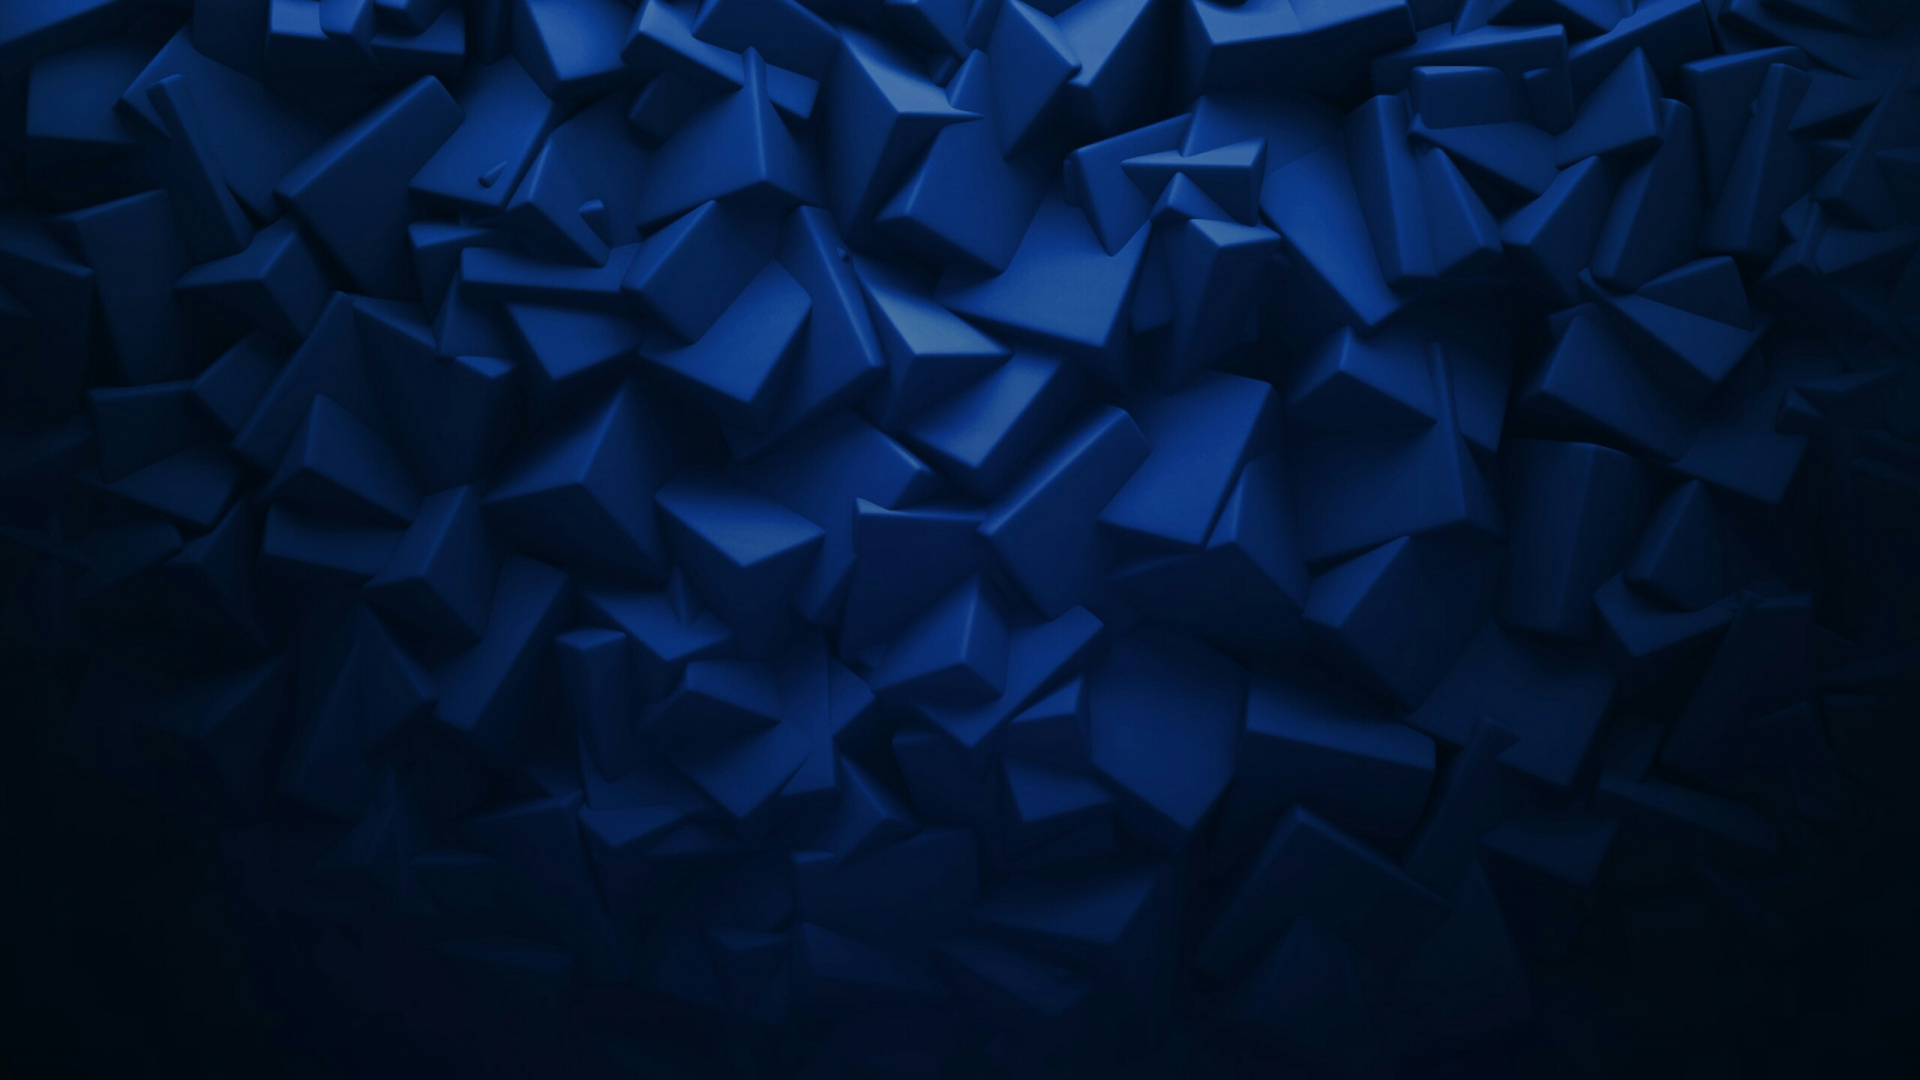 Blue and White Star Illustration. Wallpaper in 1920x1080 Resolution